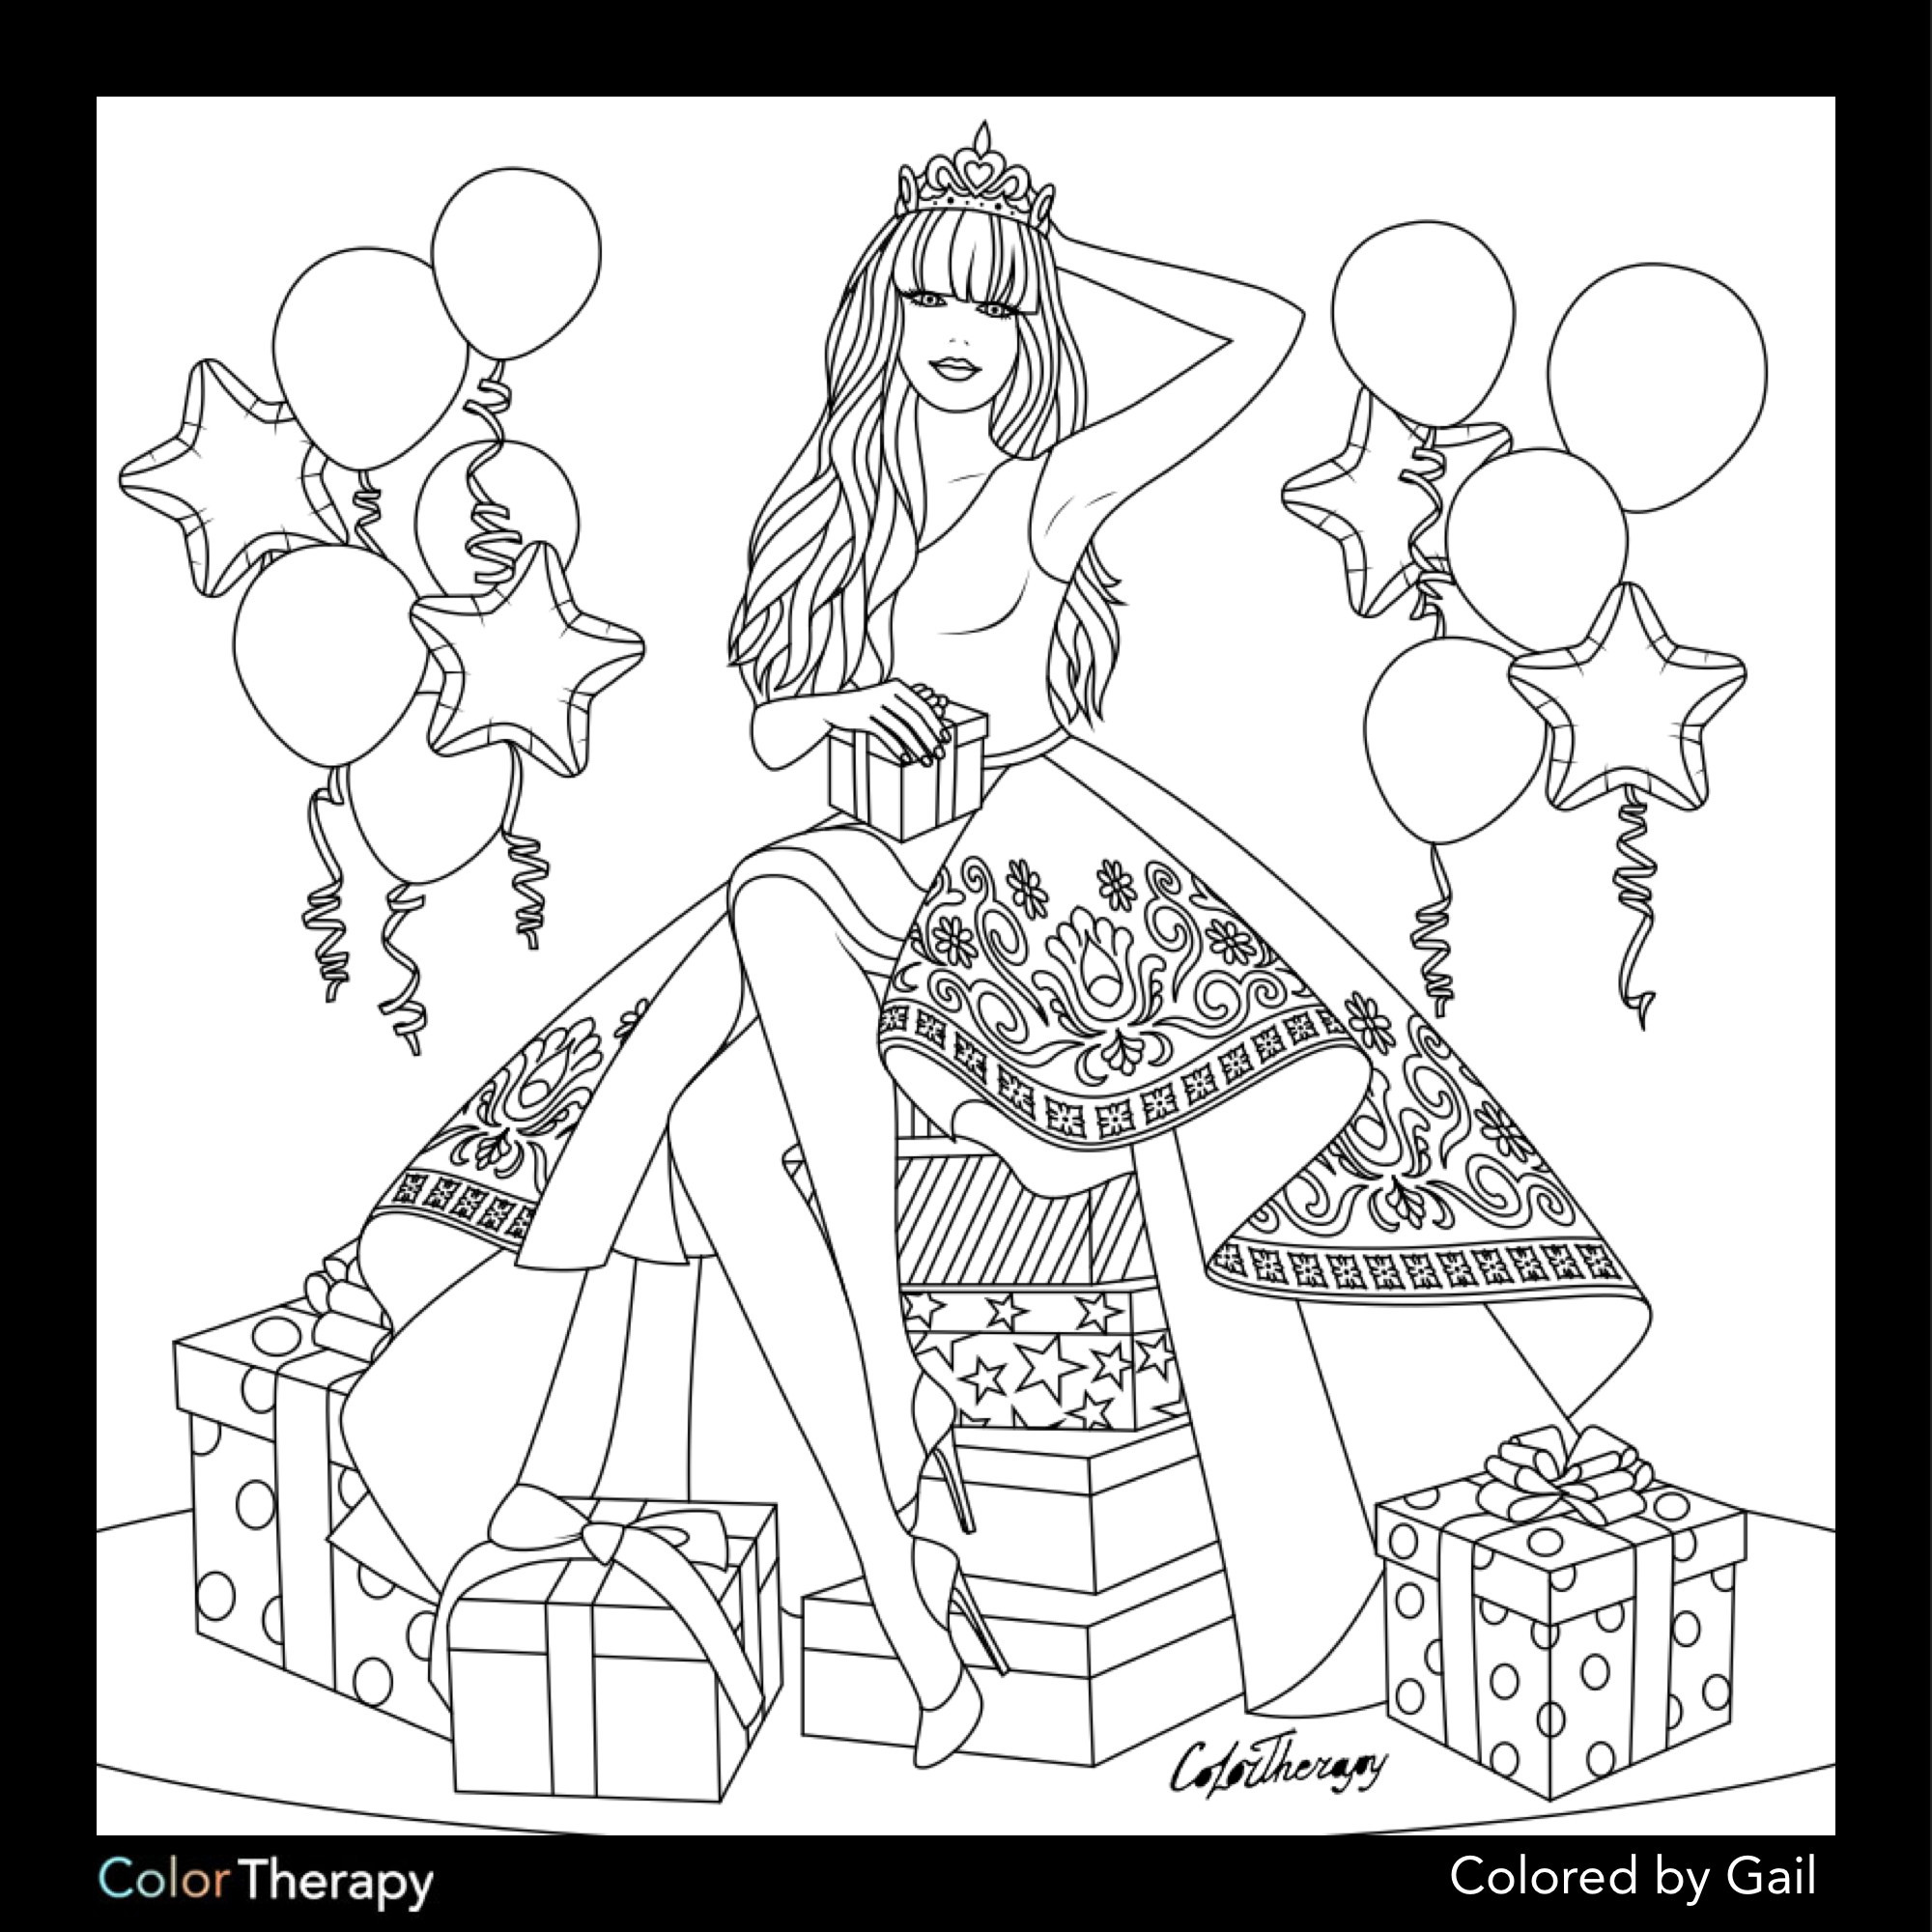 Quiver App Coloring Pages at GetDrawings | Free download